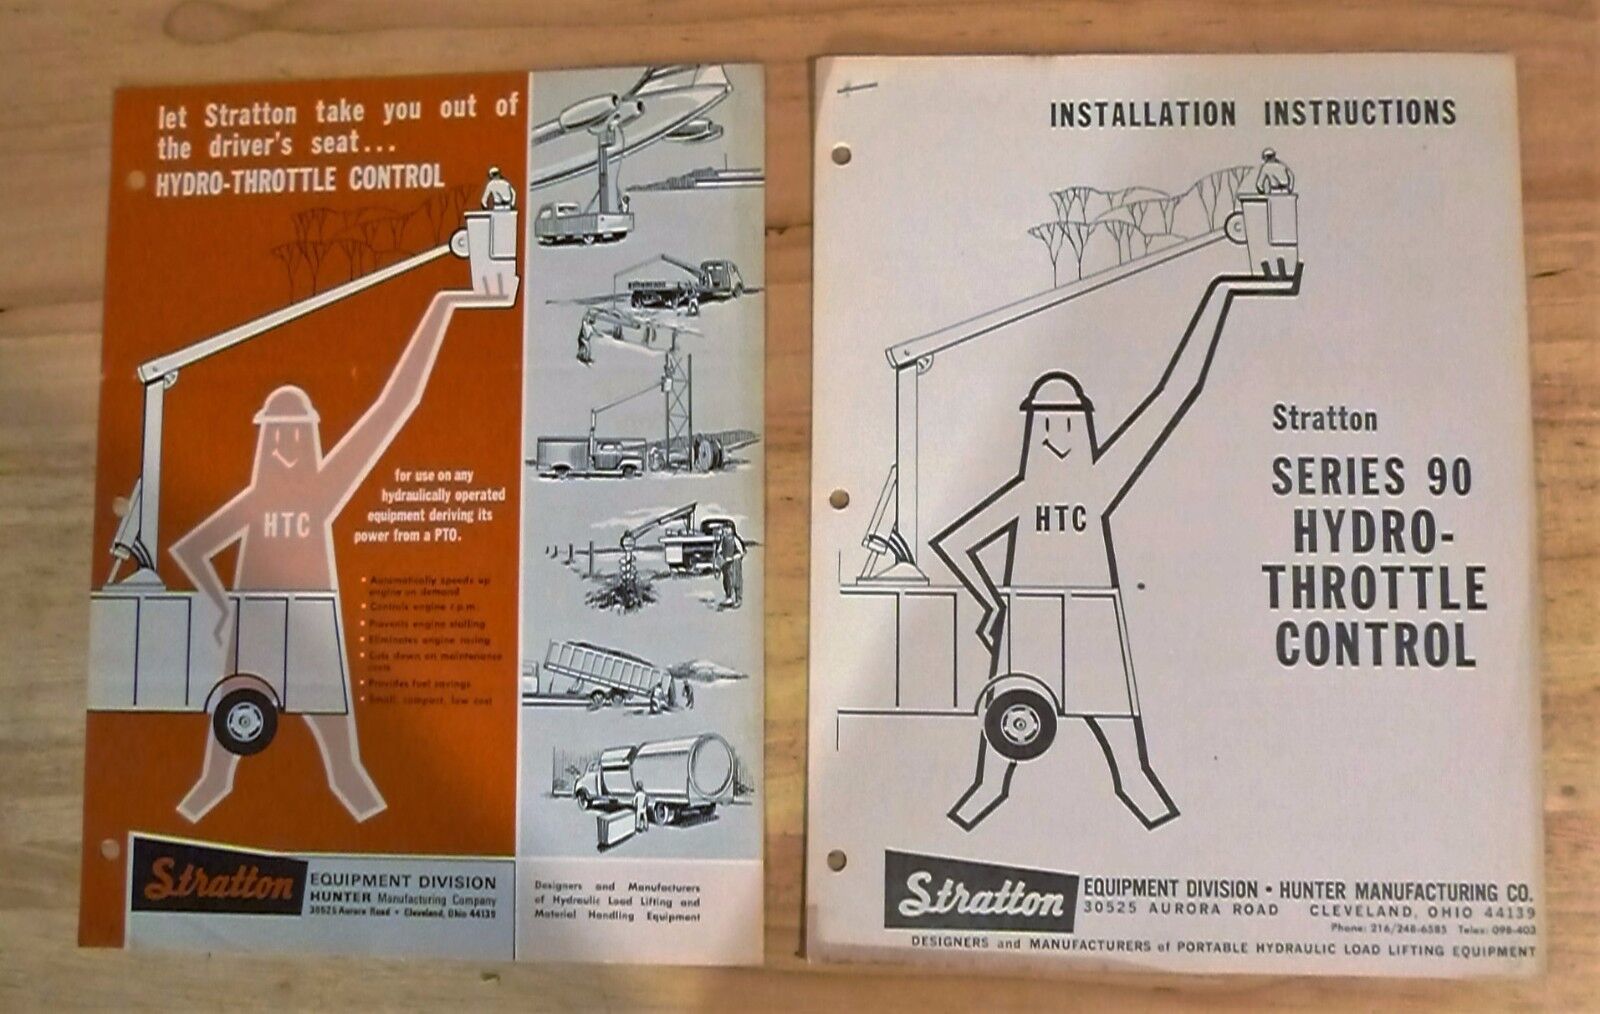 Vintage Stratton Hydro-Throttle control sales Brochure & Series 90 install inst.